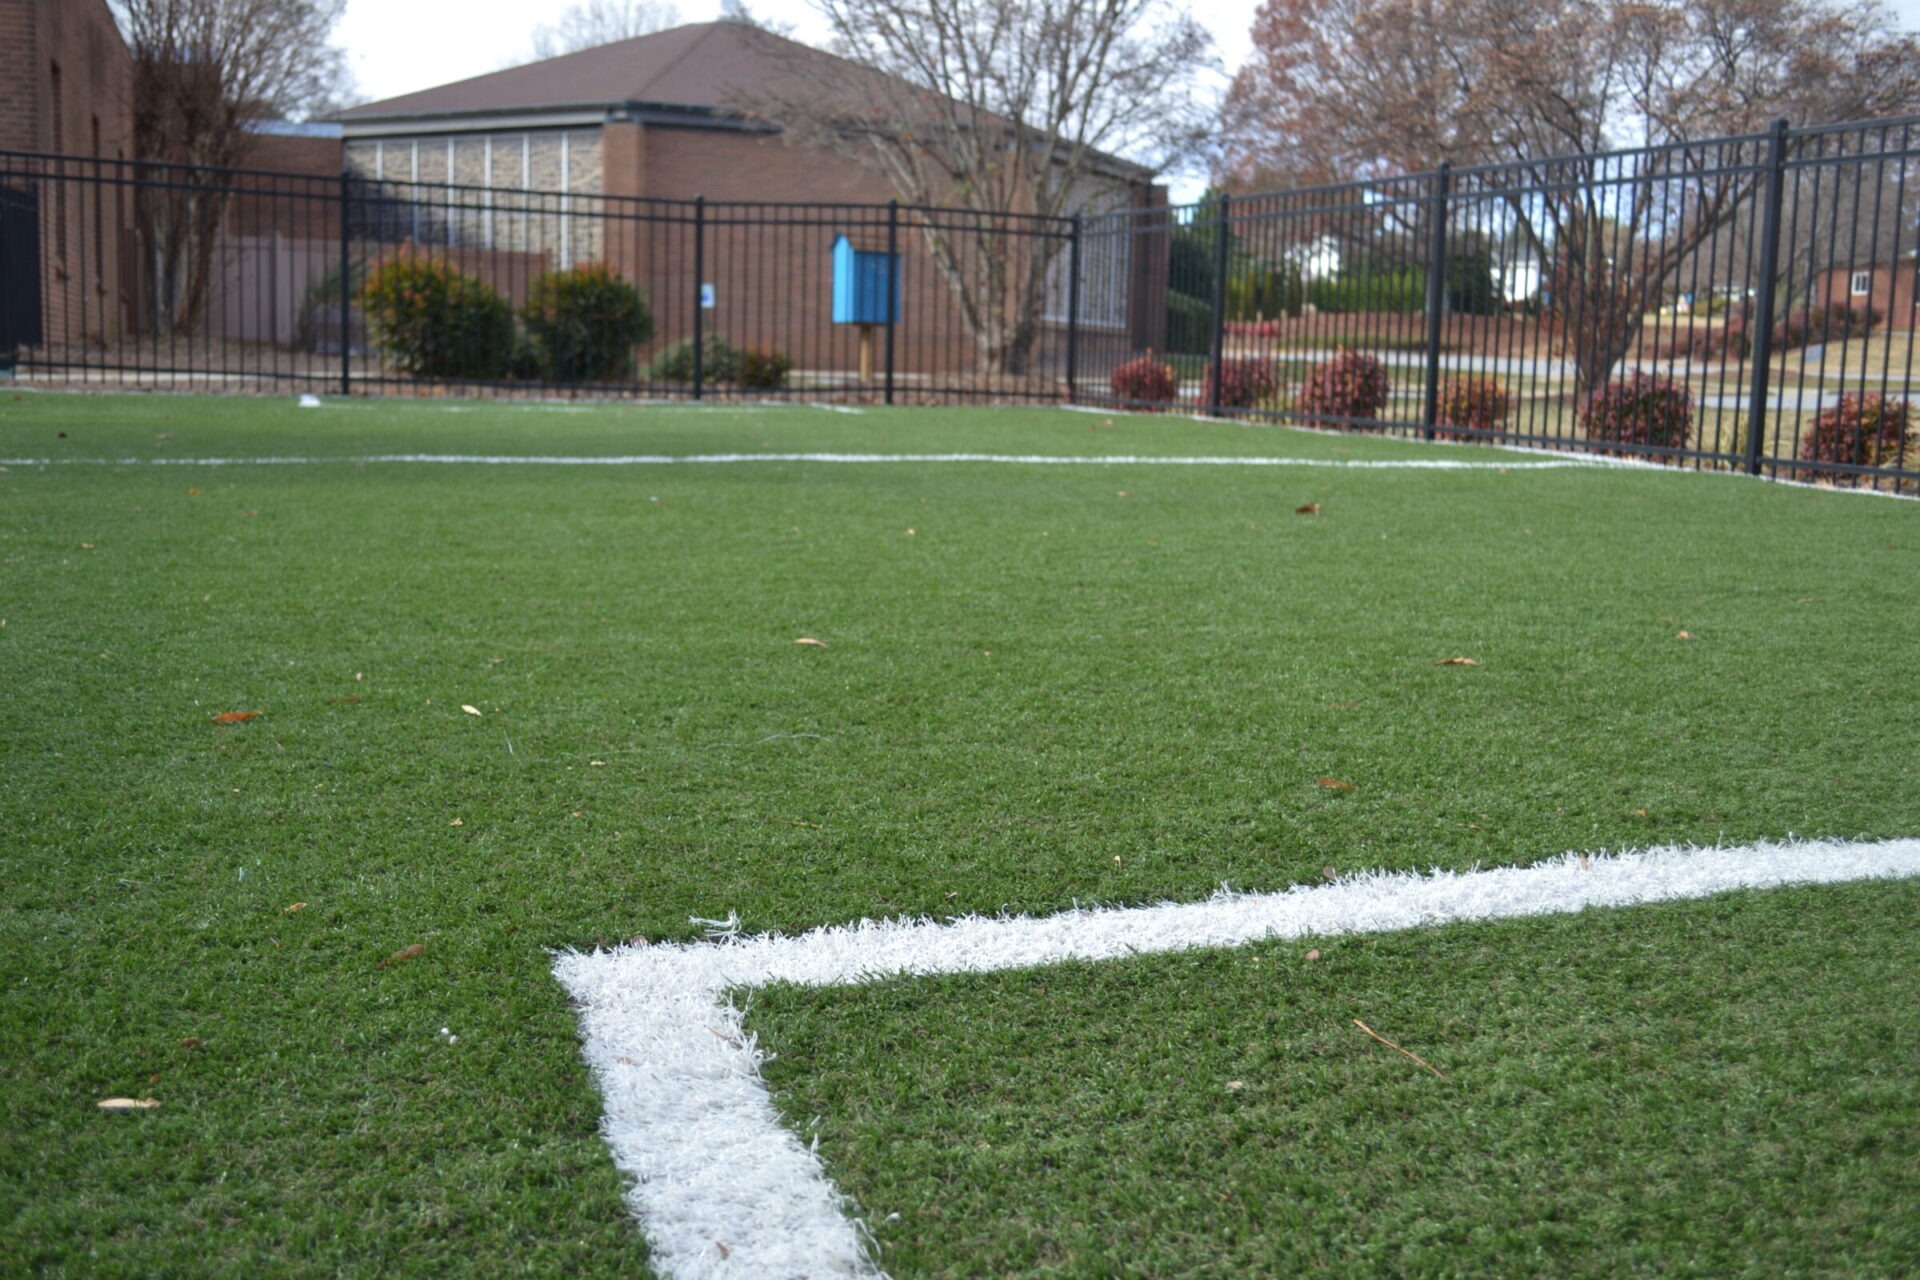 The image shows a close-up view of an artificial green turf with white boundary lines, fallen leaves, and a metal fence with buildings behind.